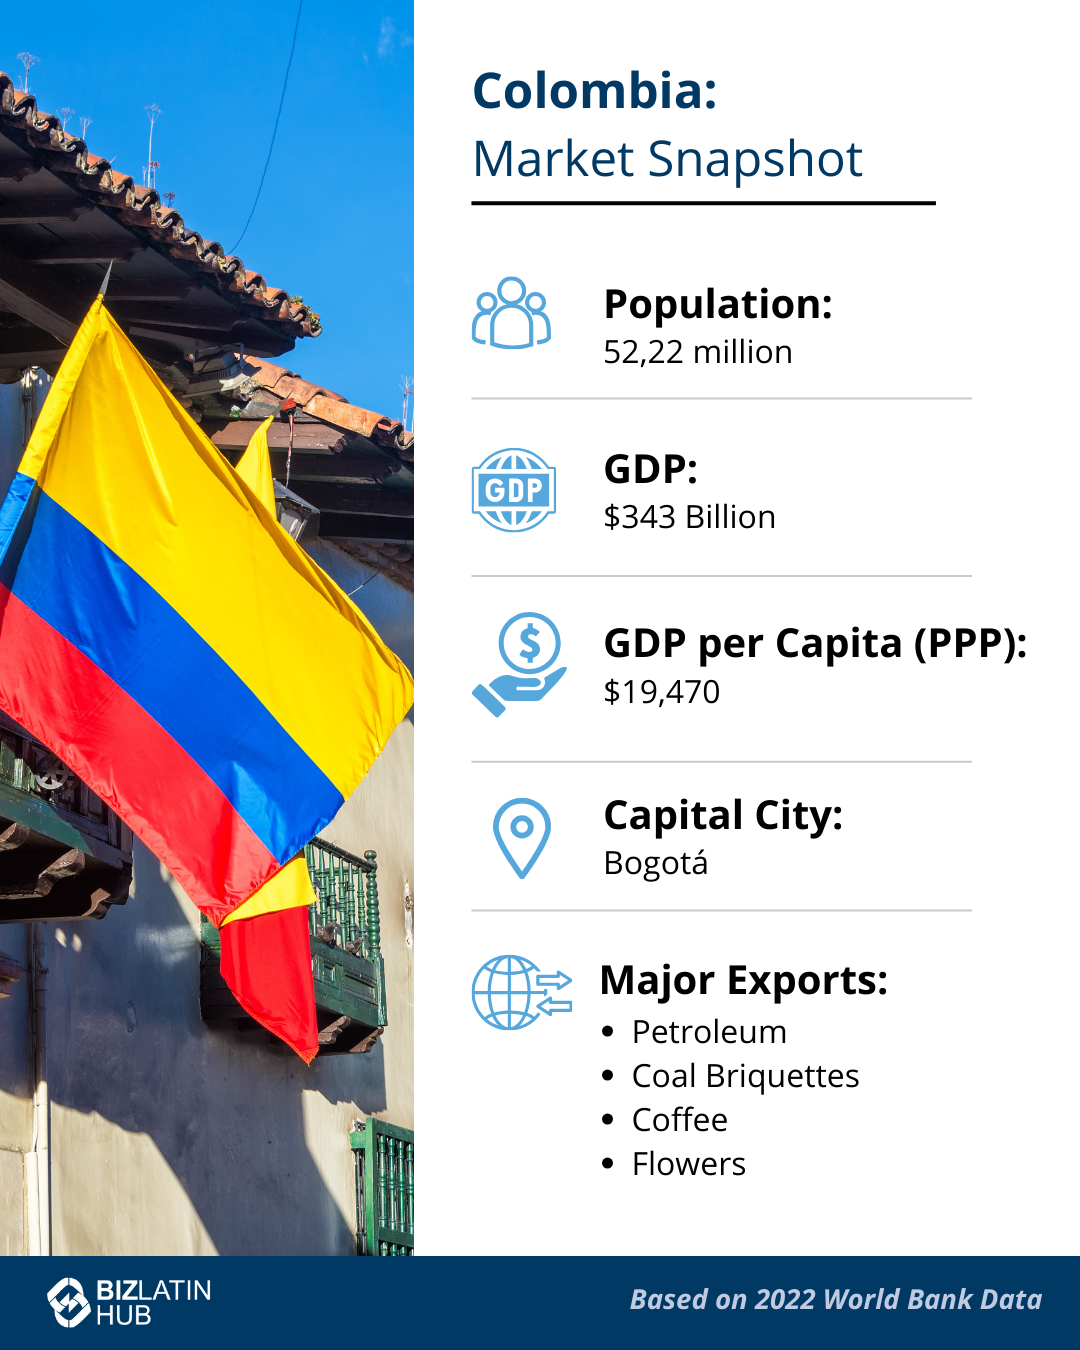 An infographic titled "Colombia: Market Snapshot" features a Colombian flag, population of 52.22 million, GDP of $343 billion, GDP per capita (PPP) of $19,470, capital city Bogota, and major exports like petroleum, coal briquettes, coffee, and flowers—highlighting the potential for nearshoring in Colombia.